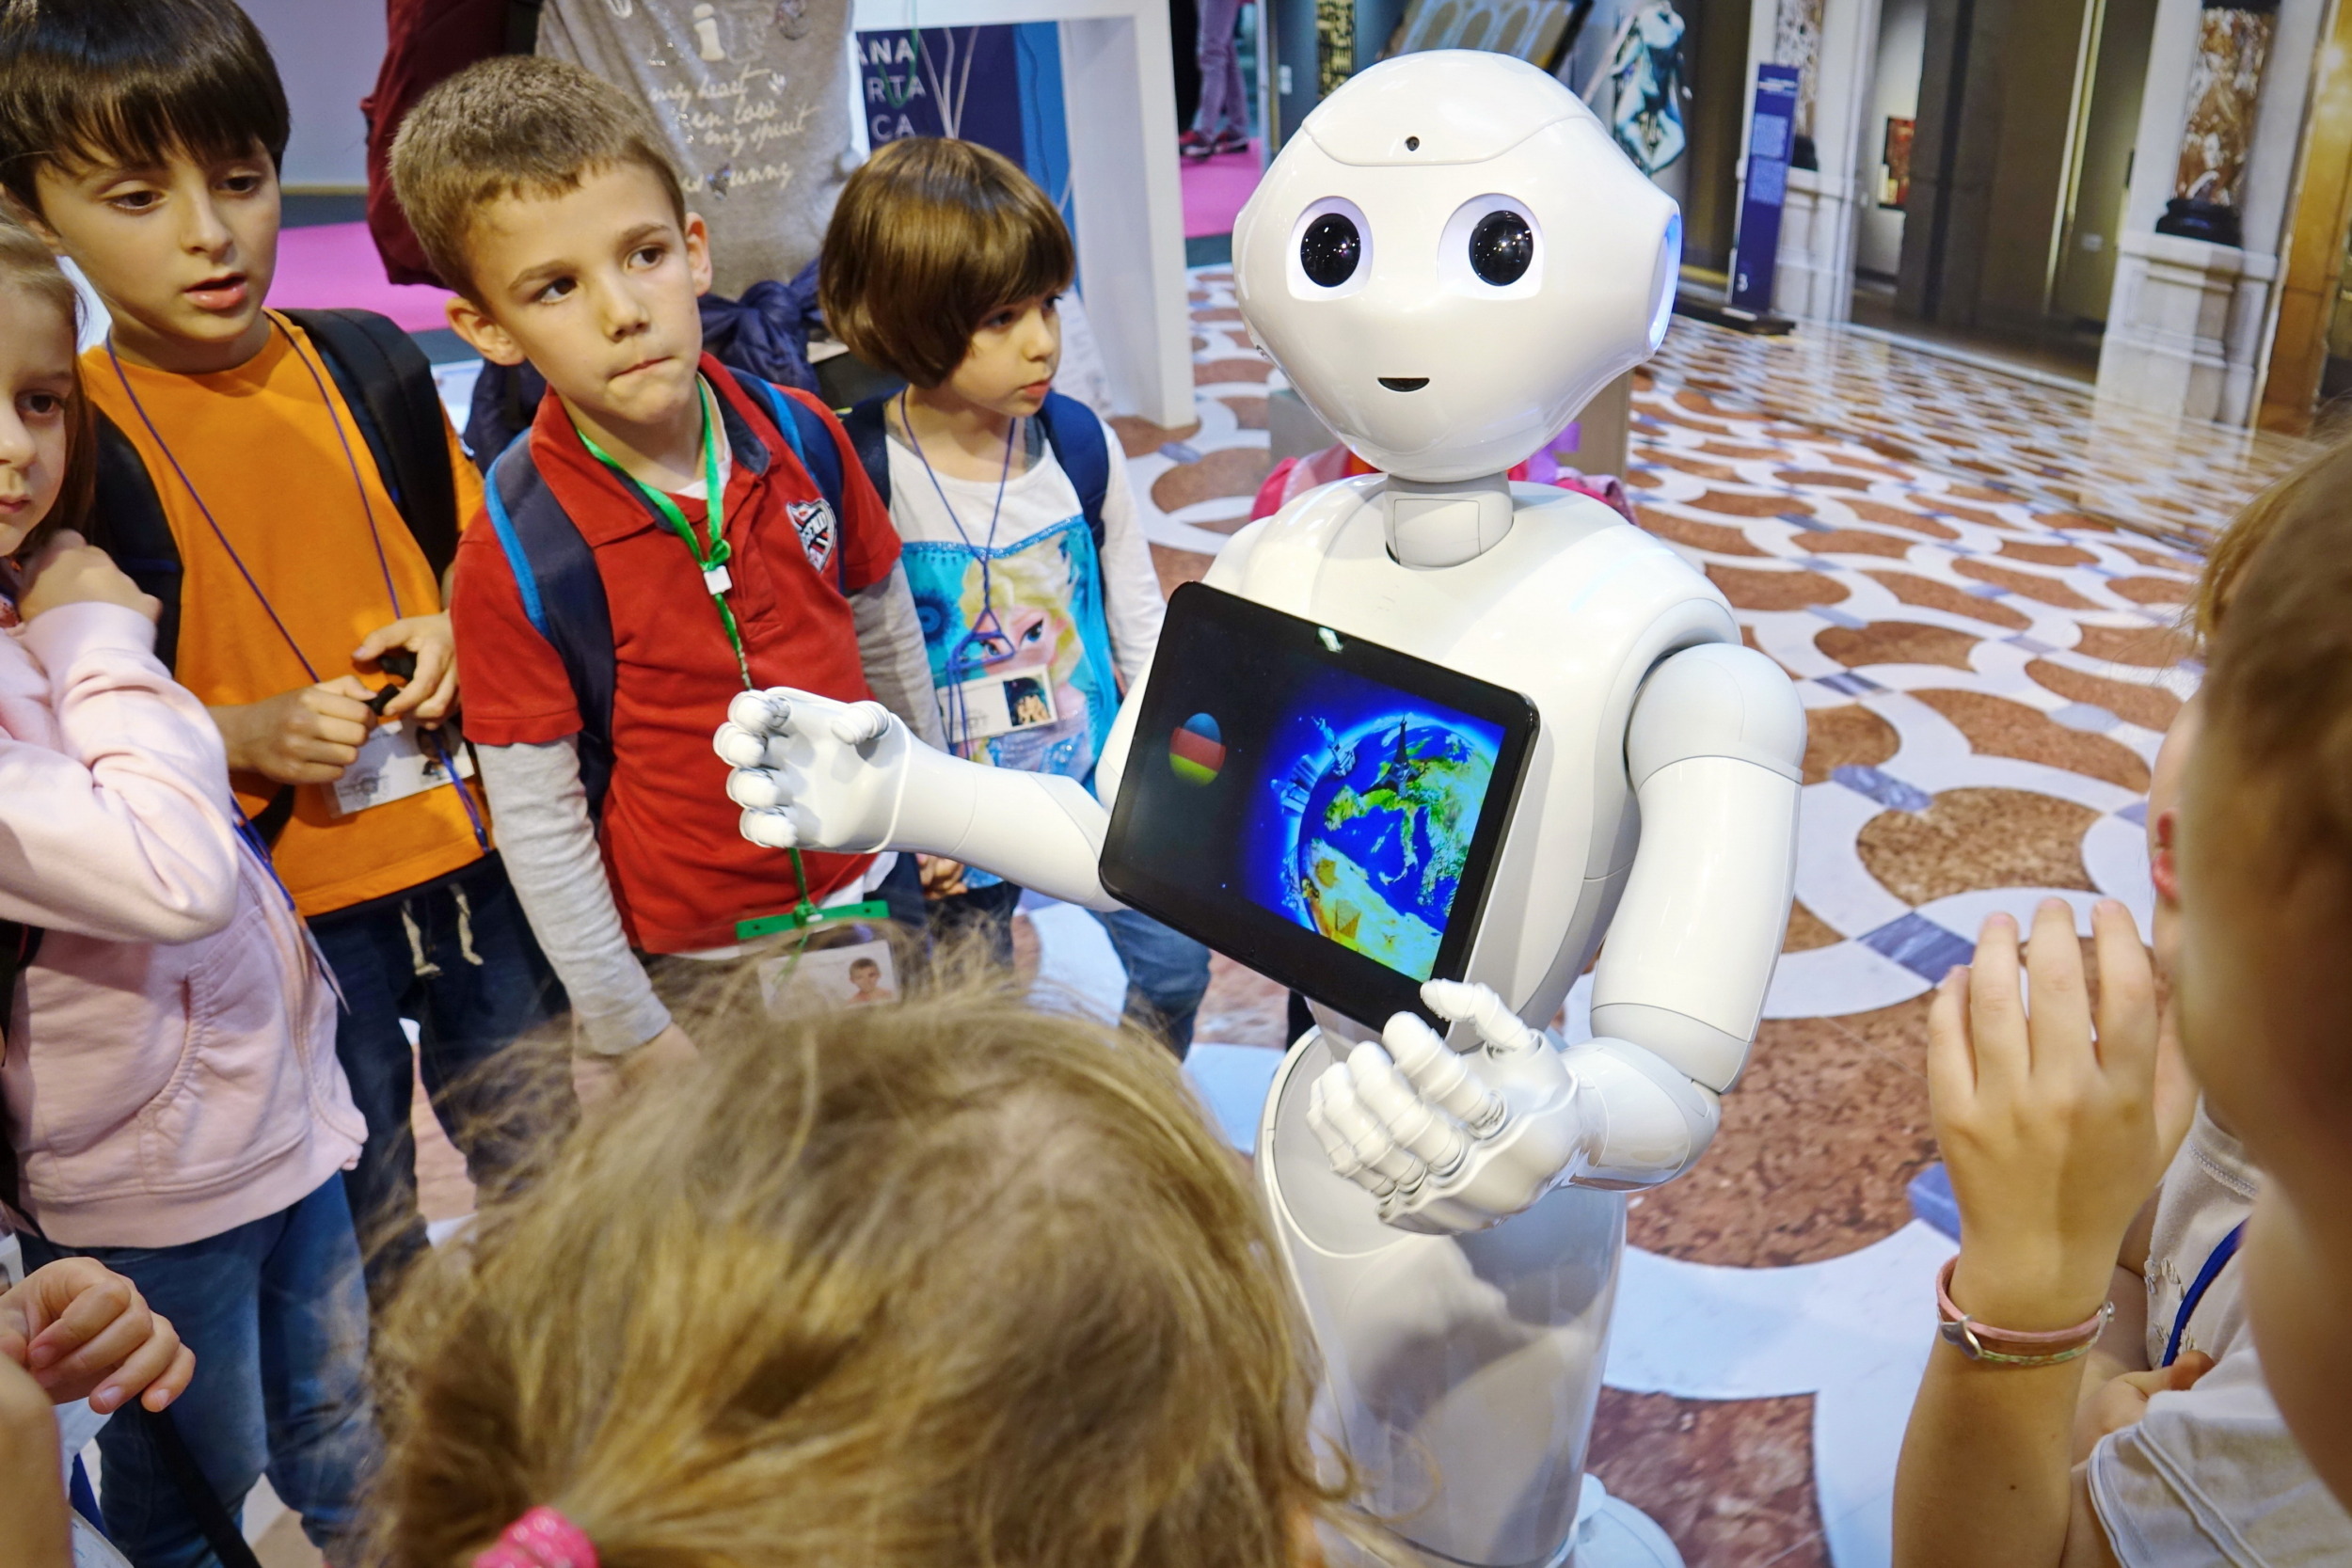 Robots in schools: White, child-sized, humanoid robot with computer monitor embedded in chest showing picture of earth, stands with hands outreached to group of elementary students surrounding it